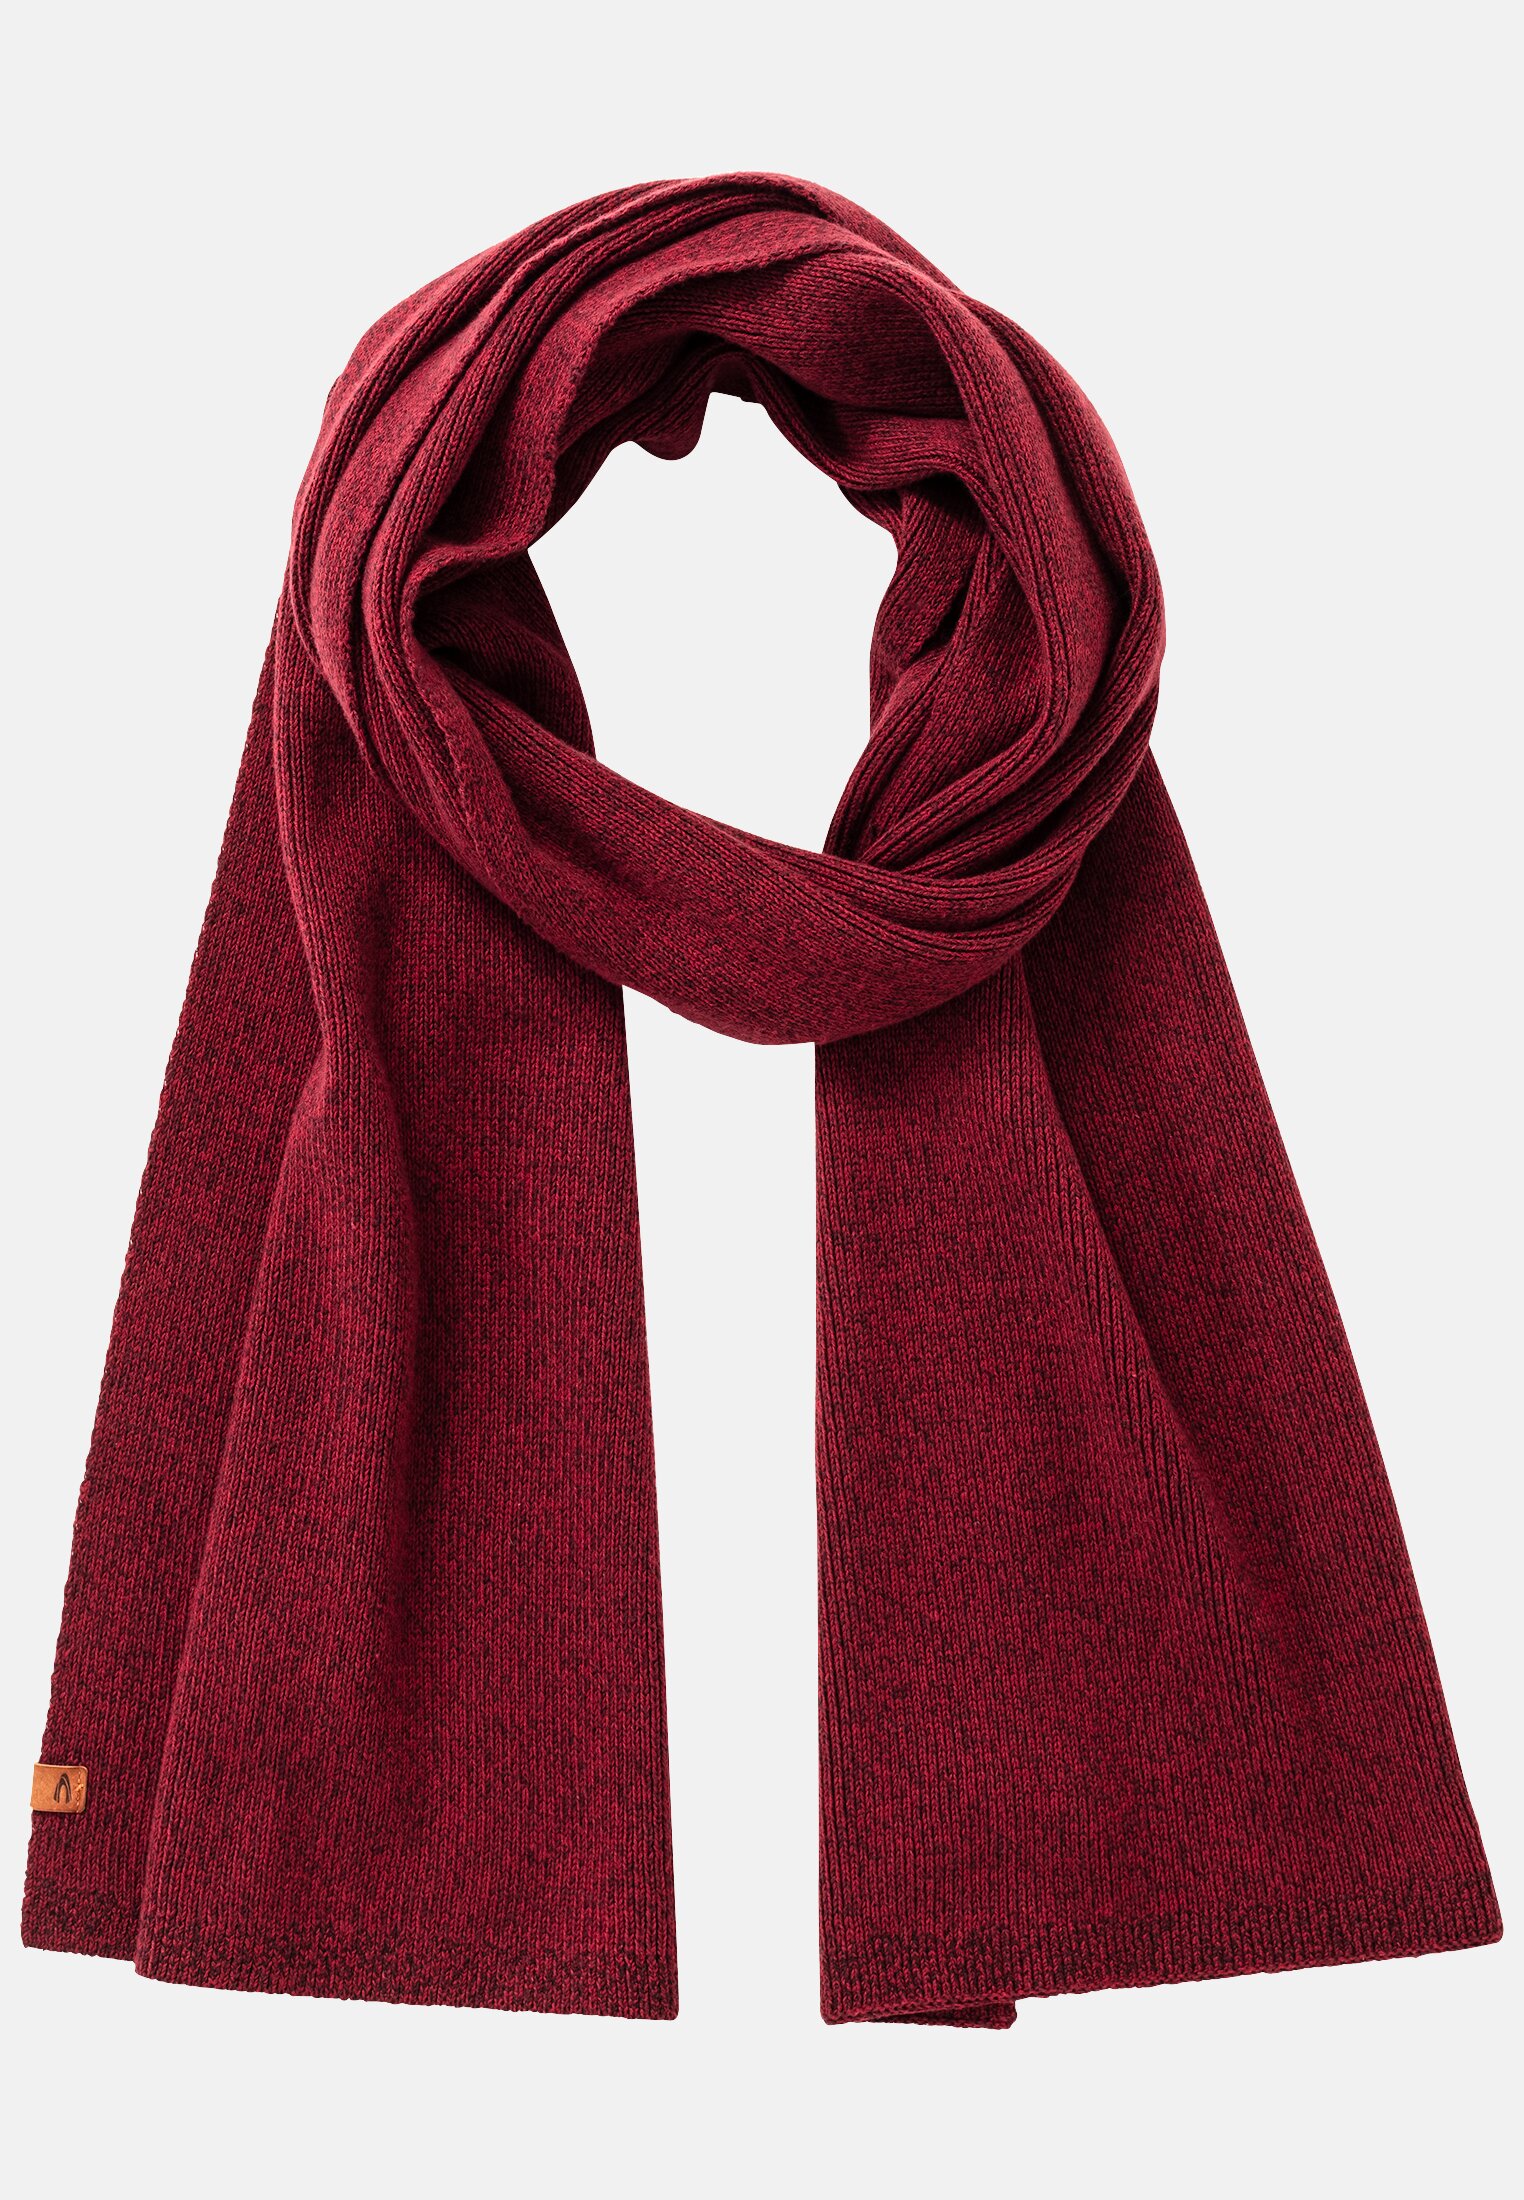 Camel Active Knitted scarf made of pure cotton